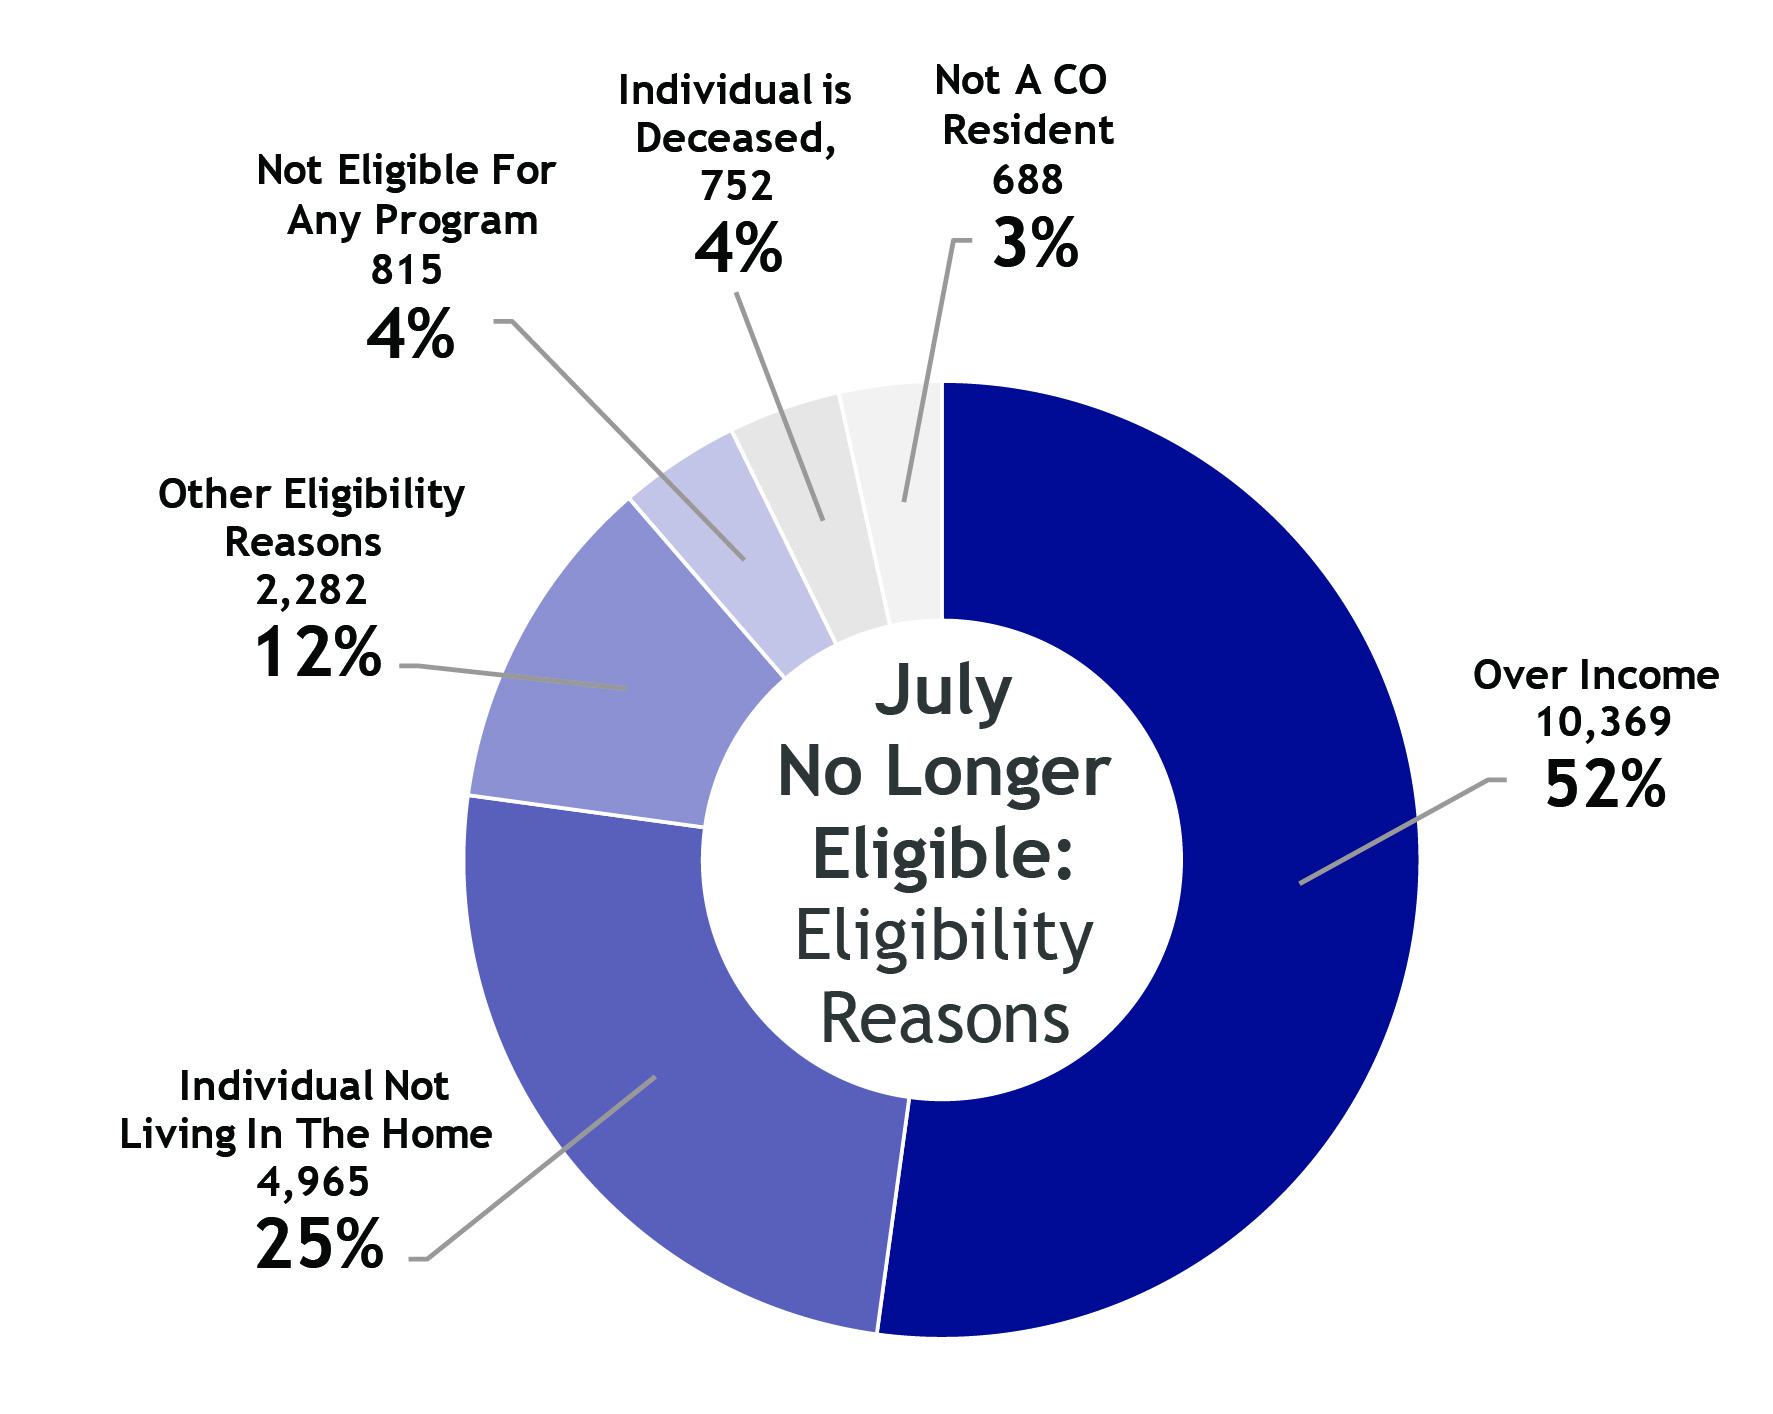 Donut chart showing detail of July Renewals section of No Longer Eligible for Eligibility Reasons with over income 10,369 the largest at 52%, Individual not living in the home 4,965 at 25%, other eligibility reasons 2,282 at 12%, not eligible for any program 815 at 4%, individual is deceased 752 at 4% and not a Colorado resident 688 at 3%.